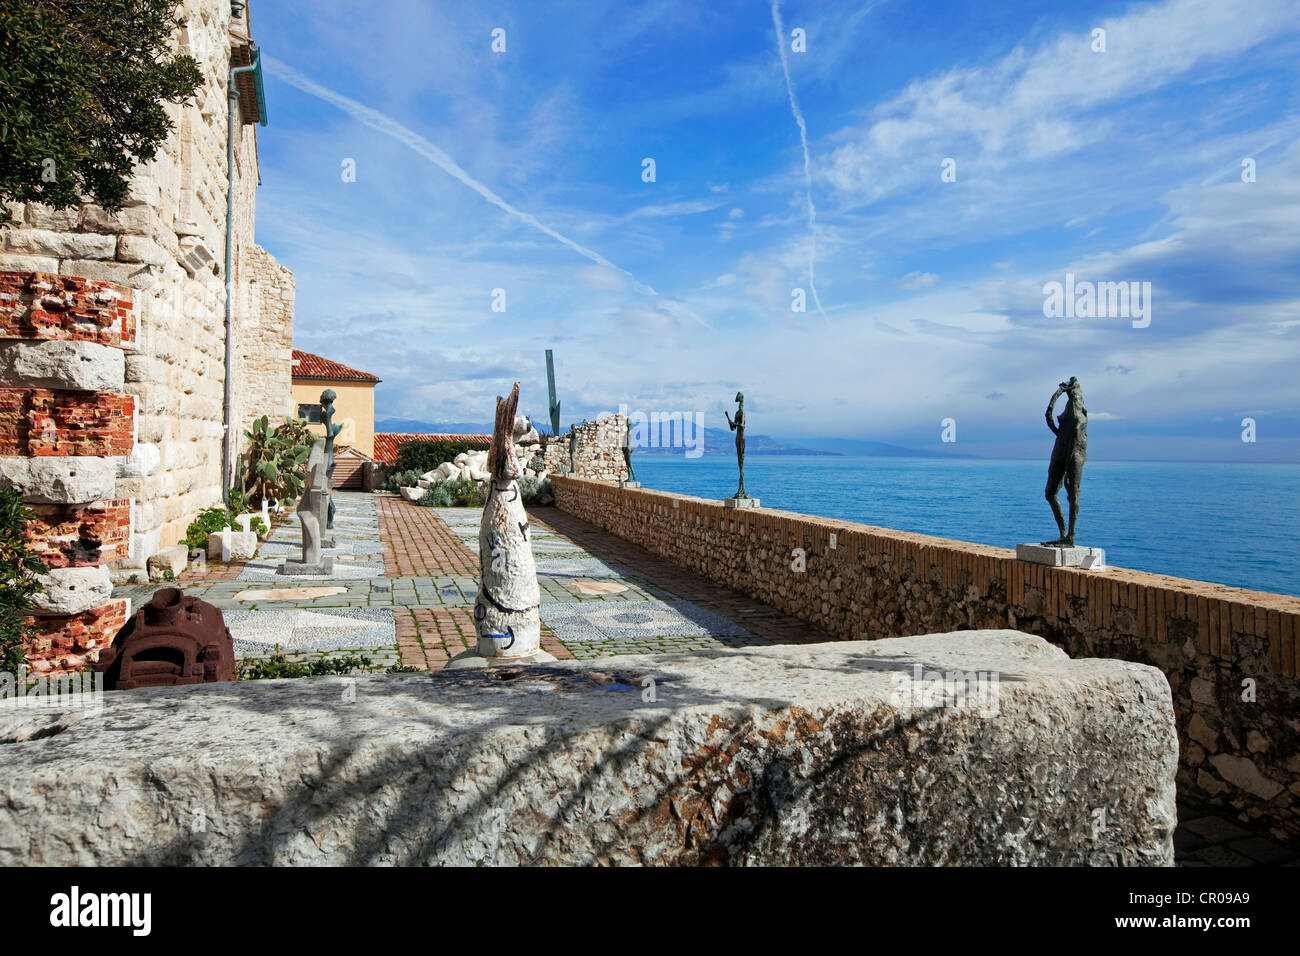 France, Alpes Maritimes, Antibes, Chateau Grimaldi, Musee Picasso Stock Photo